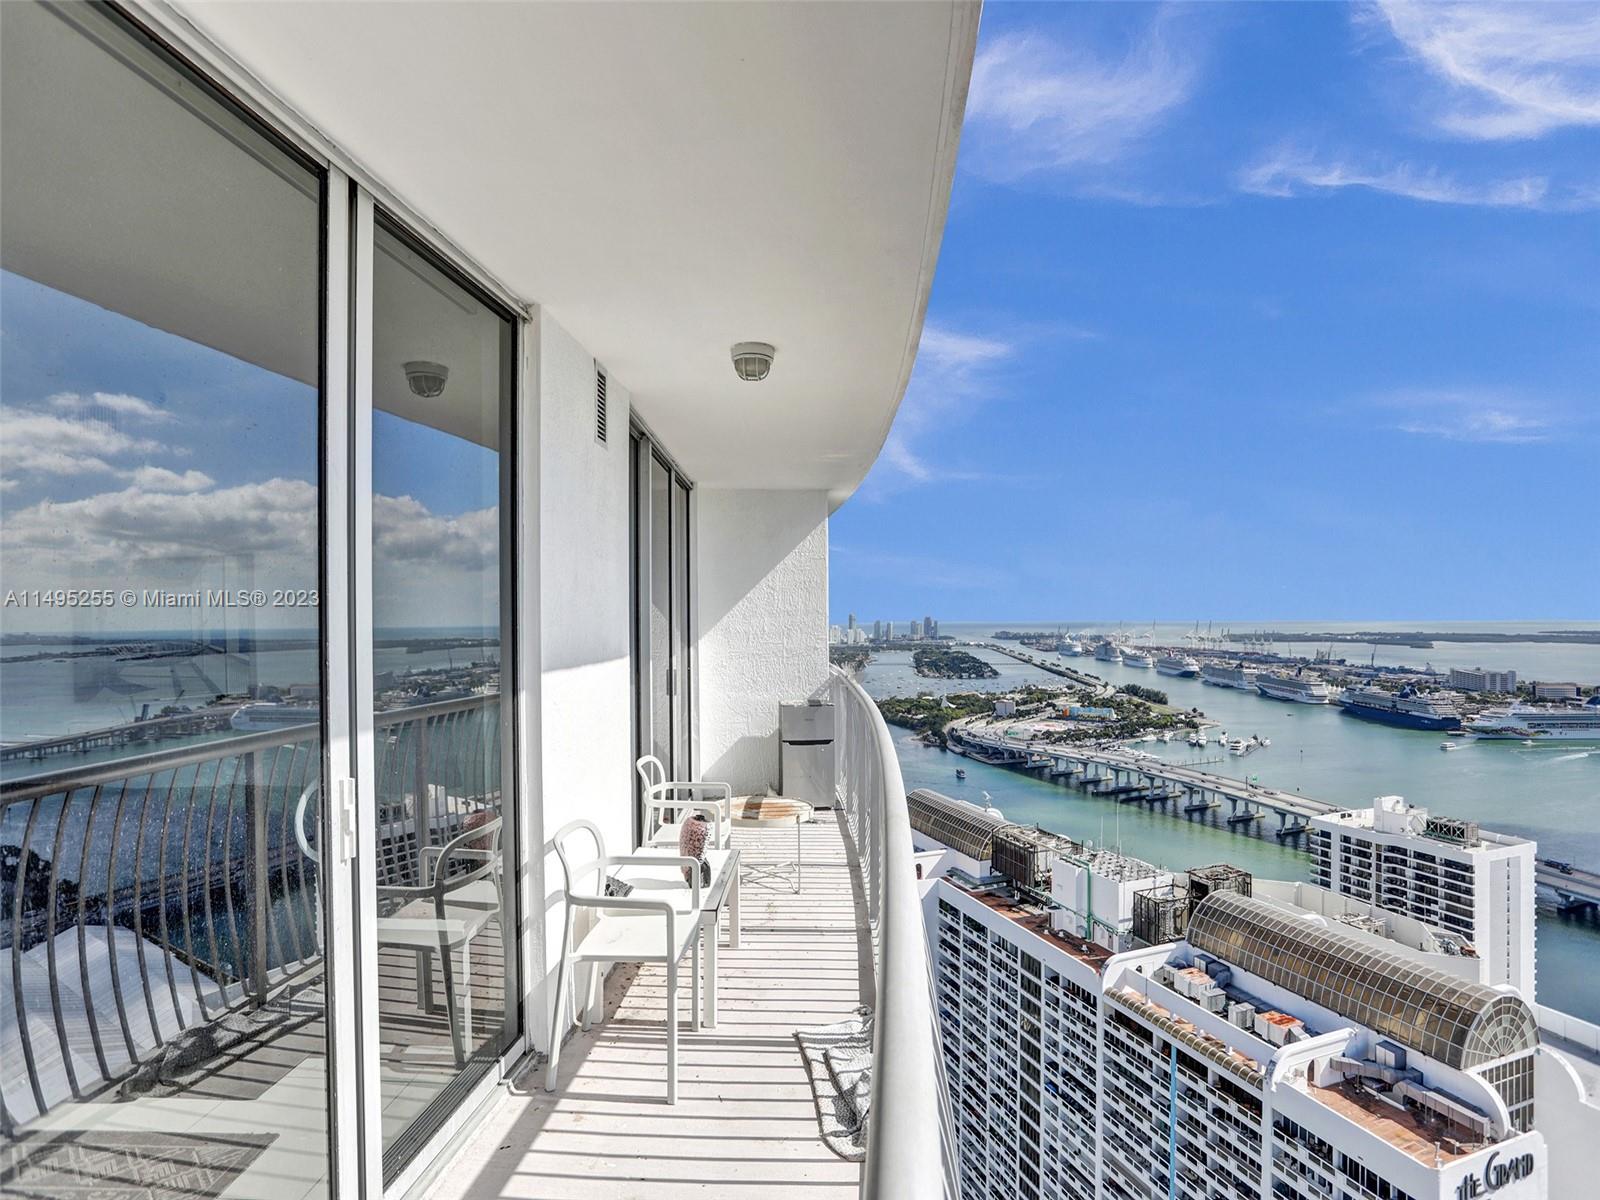 Nestled in the Opera Tower building in Miami, this one bedr, one bath condo offers an urban retreat on the 54th floor, boasting panoramic views of both the cityscape and the waters of Miami's coastline. As you step inside, you're greeted by a modern living space adorned with sleek finishes and an open floor plan. The kitchen features top of the line stainless steel appliances, granite countertops, and ample cabinetry.Located in the heart of Miami, this residence places you at the epicenter of entertainment, and convenience. With proximity to Downtown Miami and Brickell neighborhood, world-class dining, shopping, and nightlife are moments away. The building itself offers an array of amenities, including a fitness center, swimming pool, spa, concierge services, and secure parking.